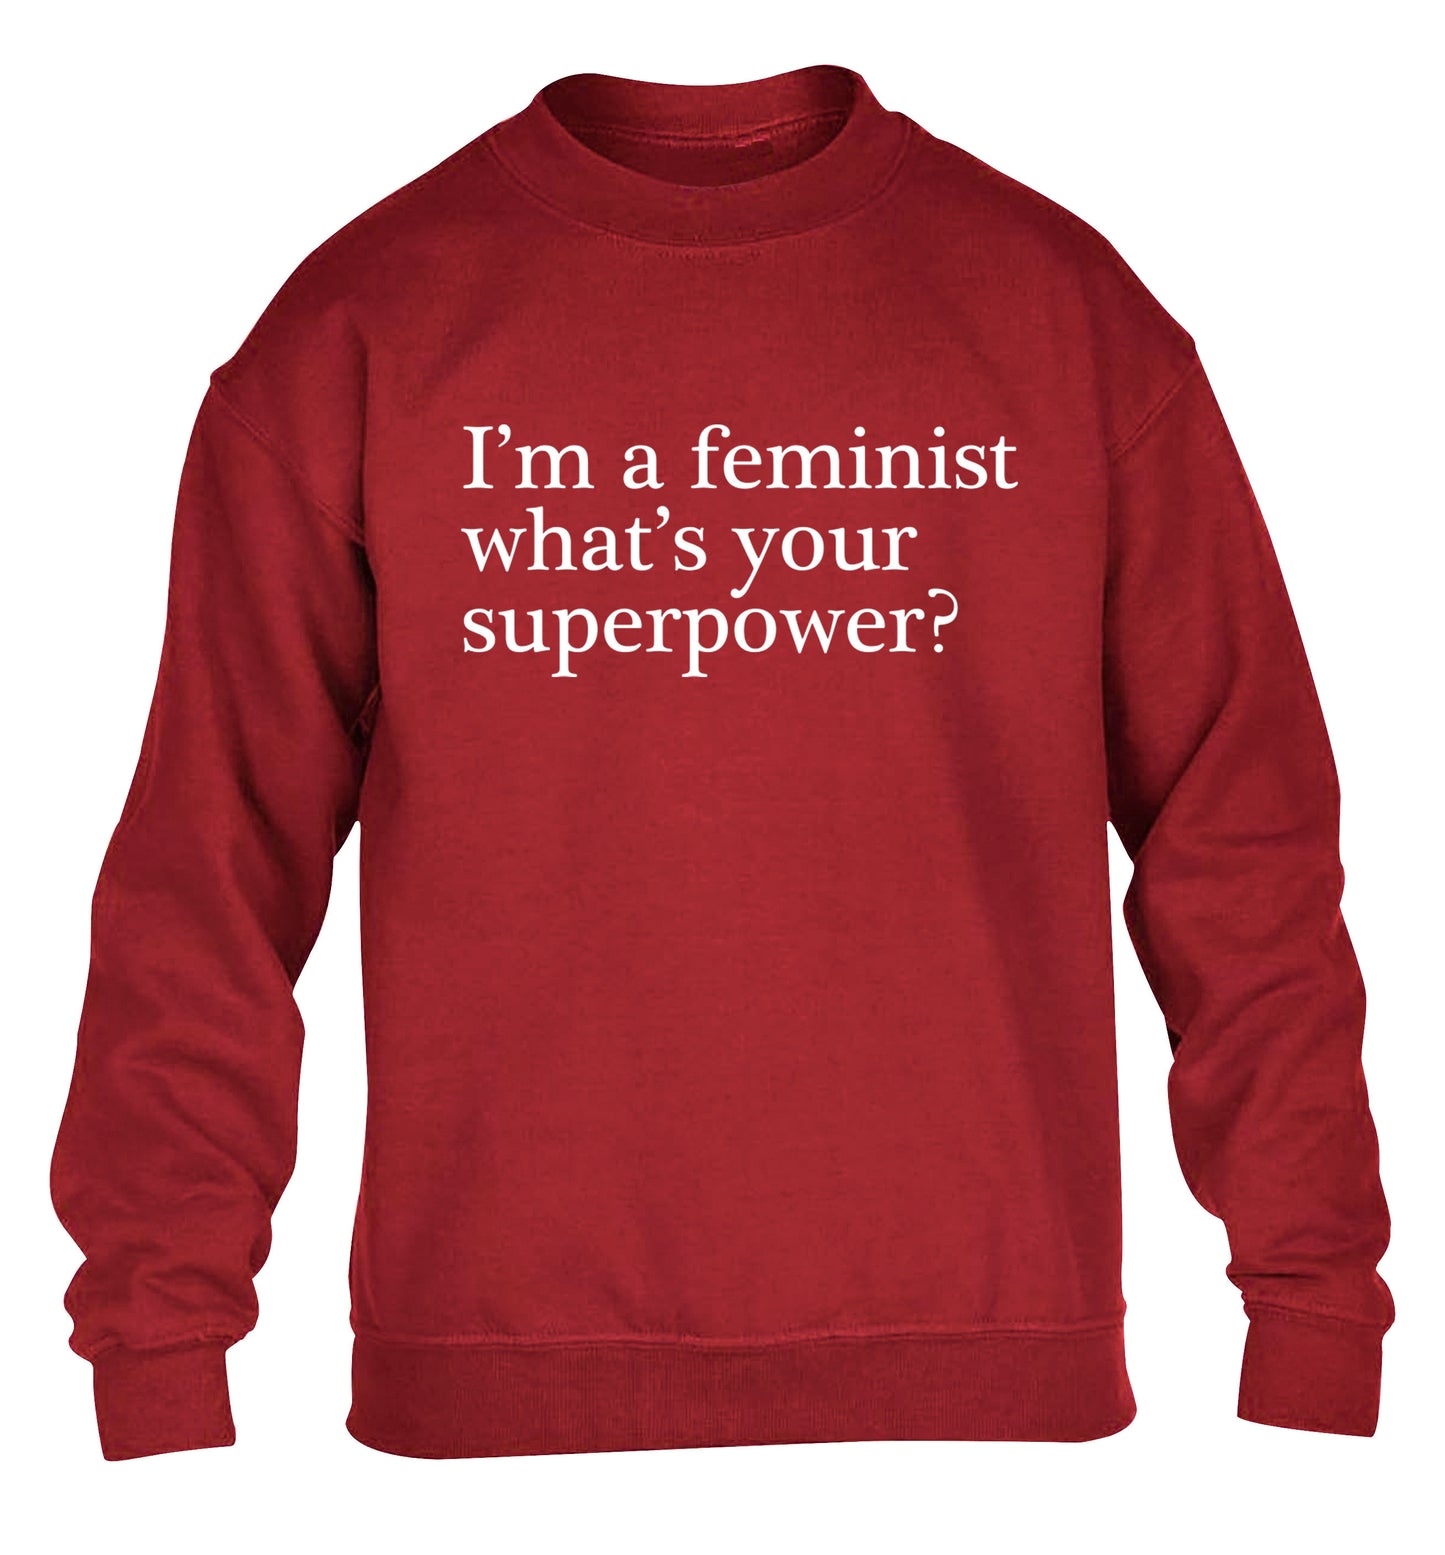 I'm a feminist what's your superpower? children's grey sweater 12-14 Years